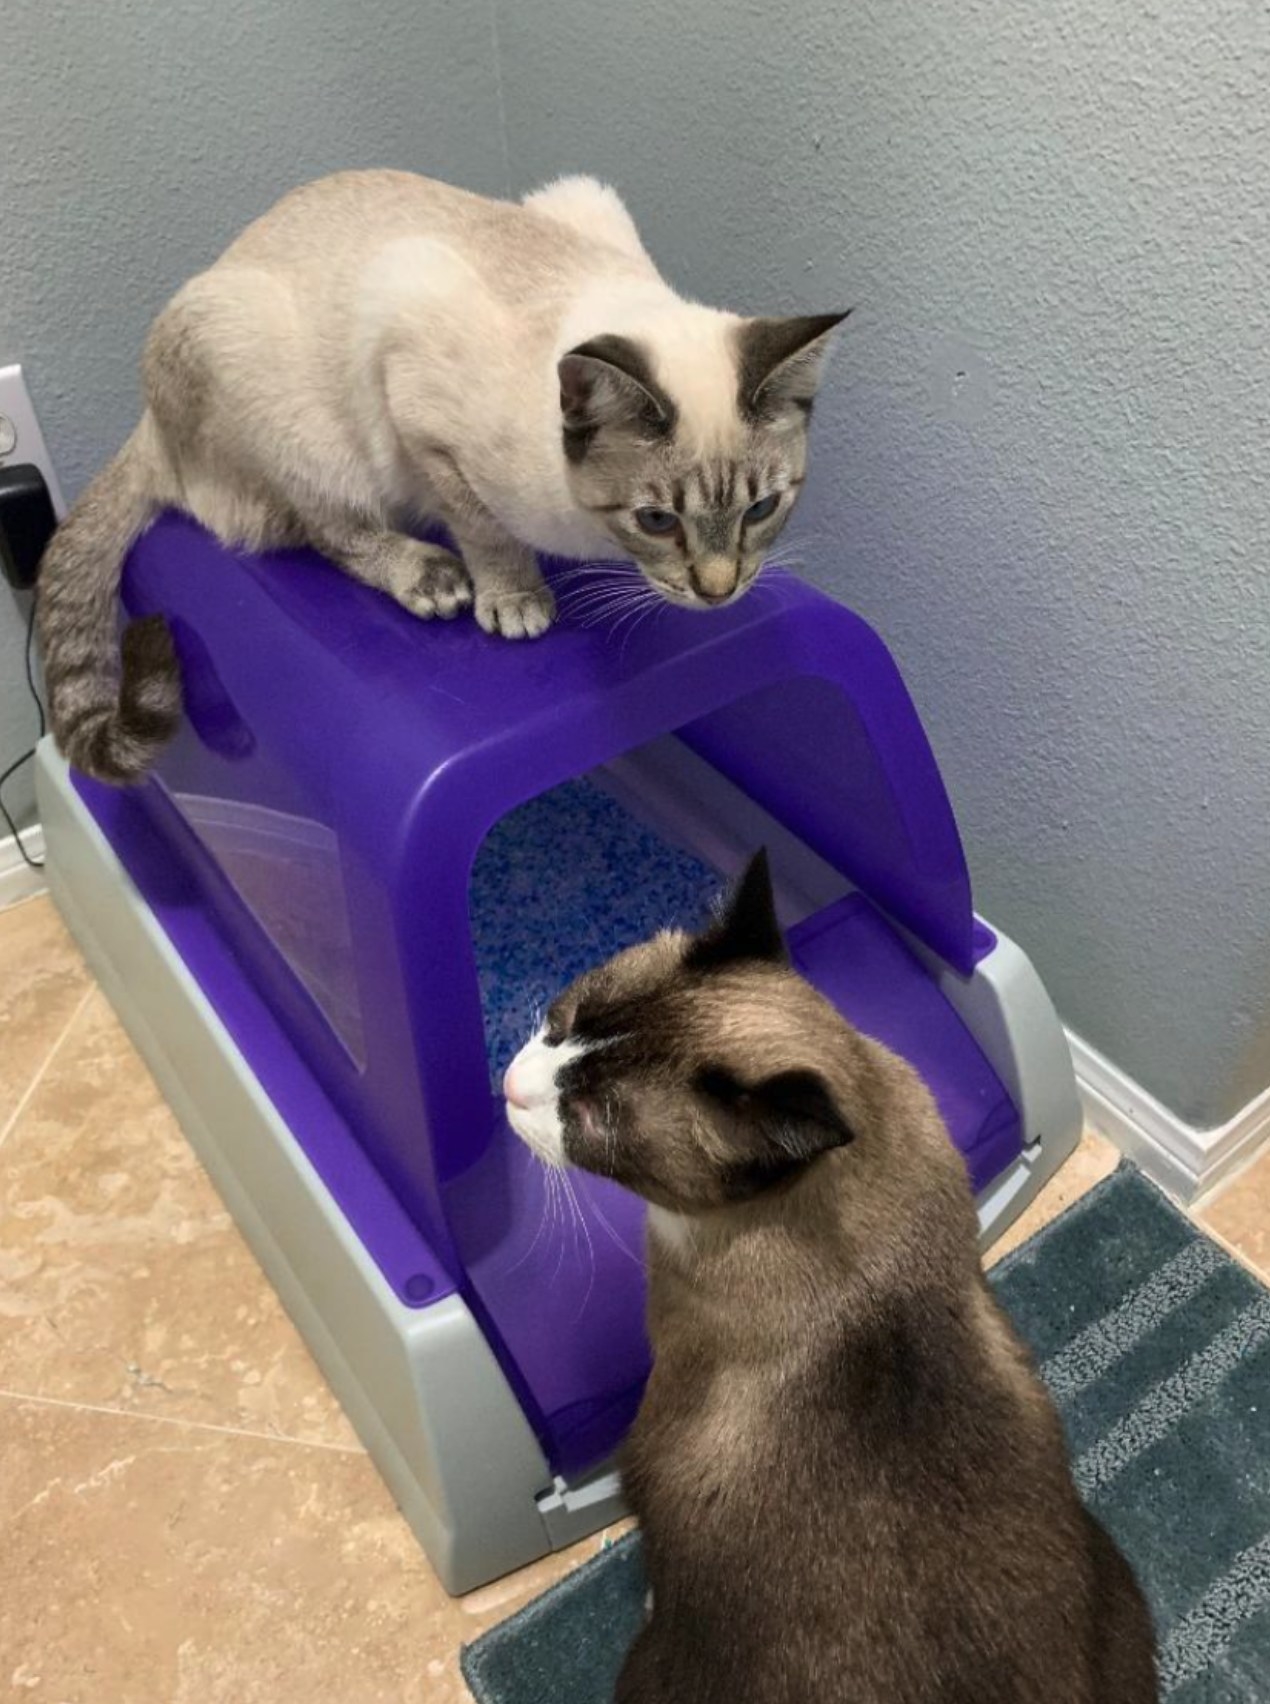 The self-cleaning litter box with a purple roof